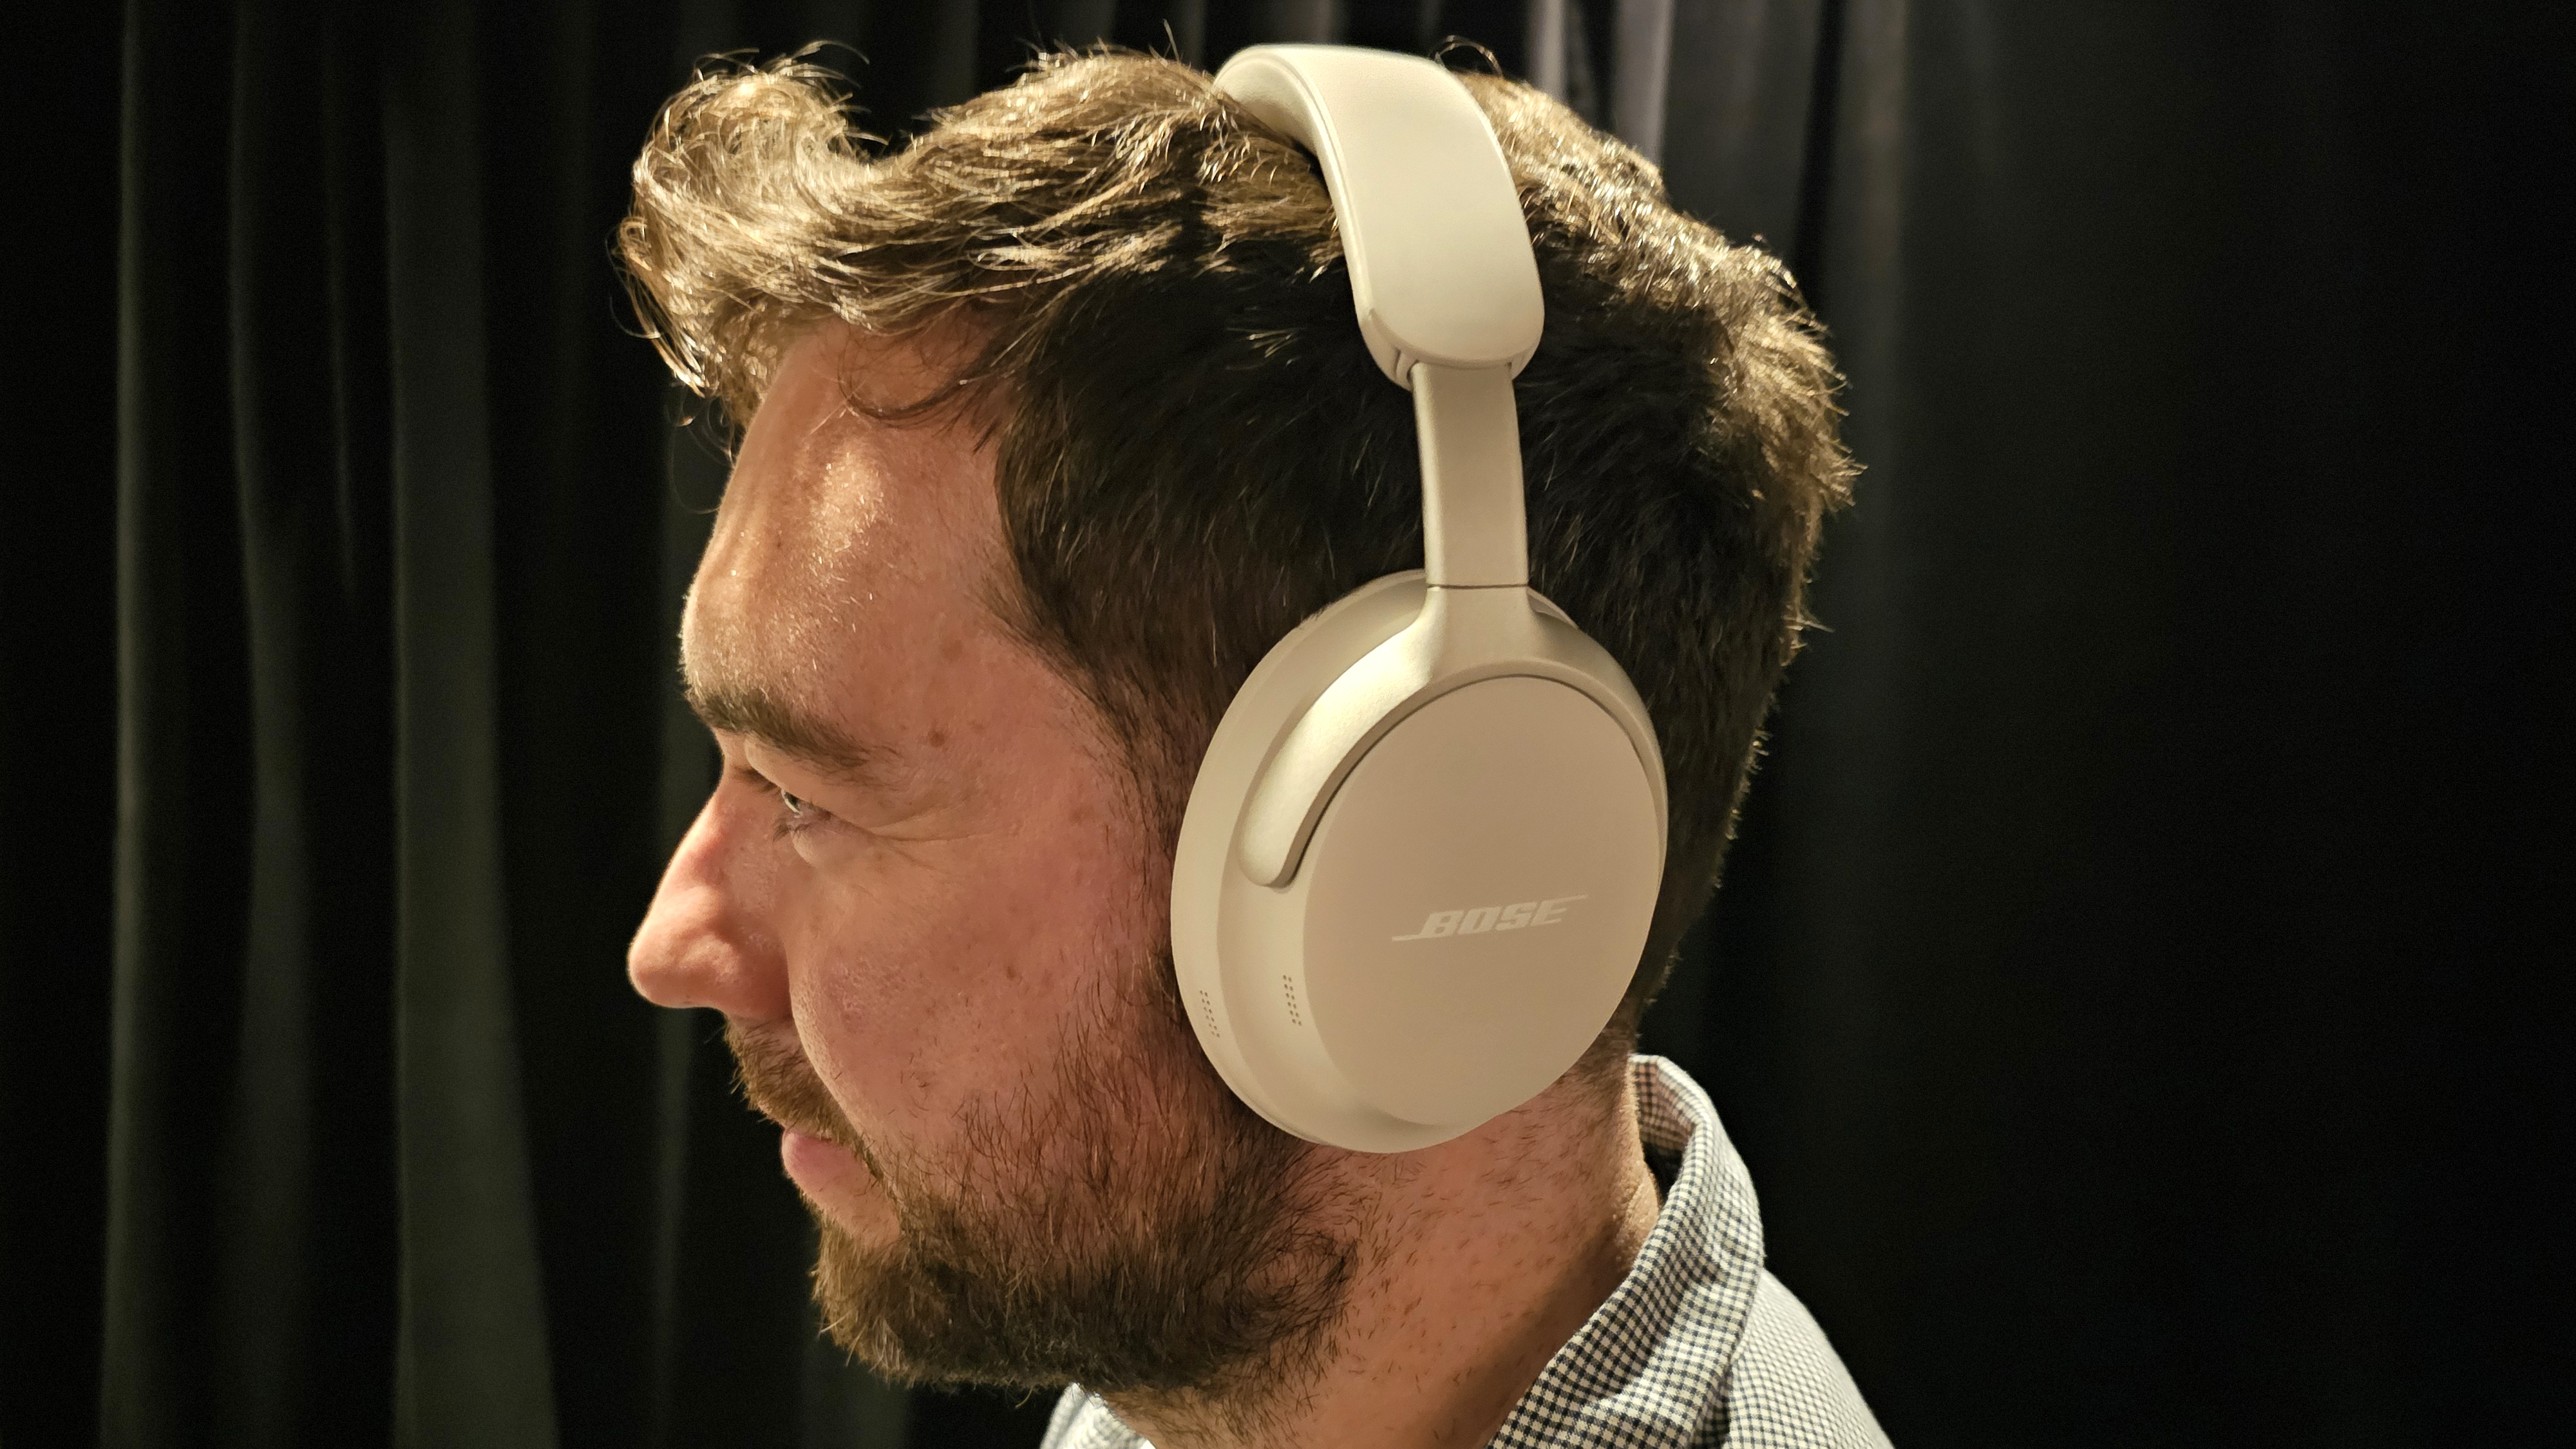 I tested Bose's QuietComfort Ultra Headphones and these are the